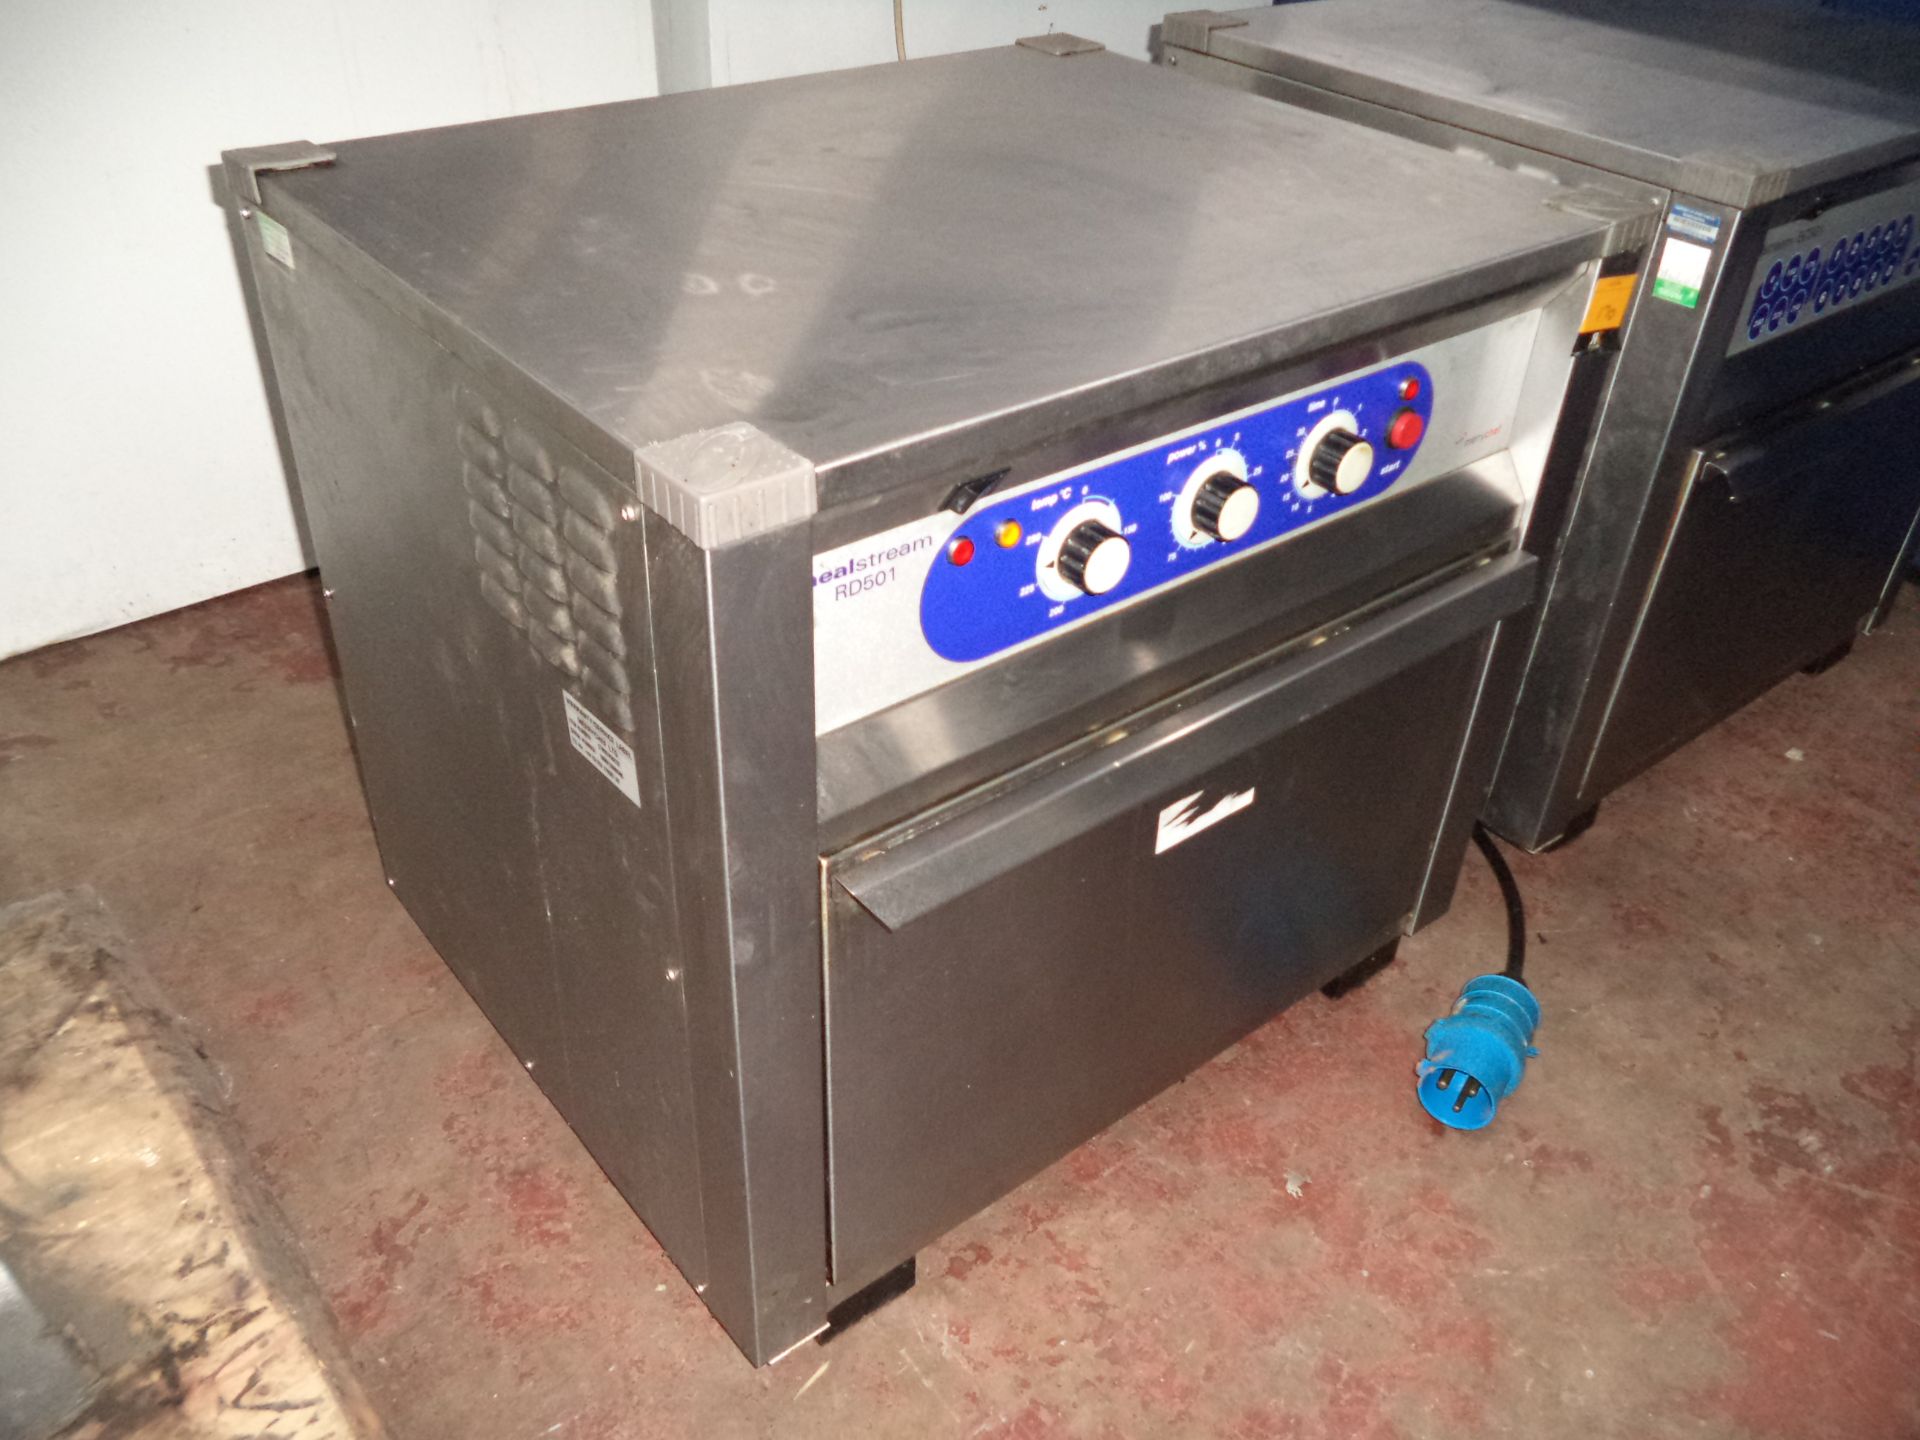 Merrychef Mealstream RD501 multifunction oven IMPORTANT: Please remember goods successfully bid upon - Image 2 of 3